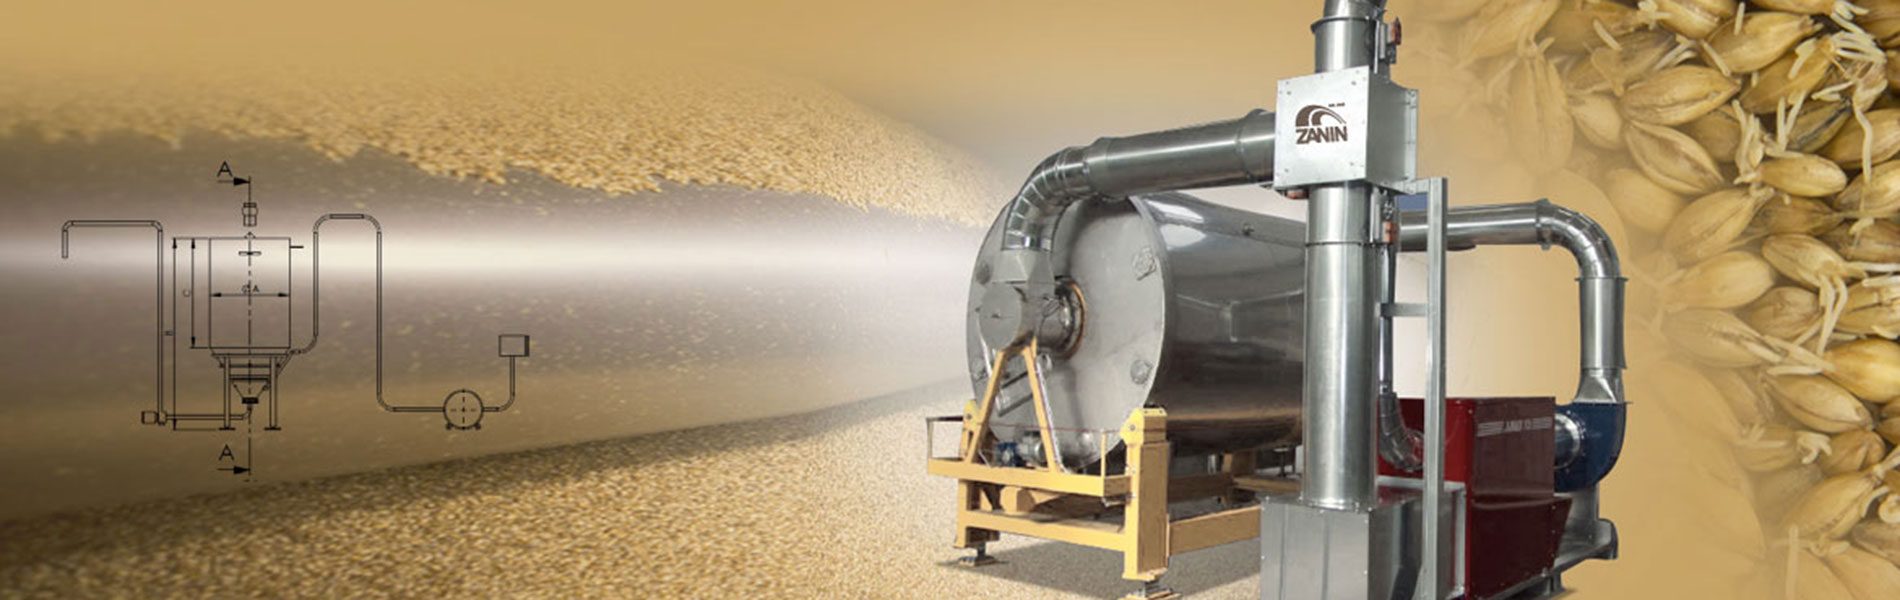 Malting systems, malting equipments and malting machines